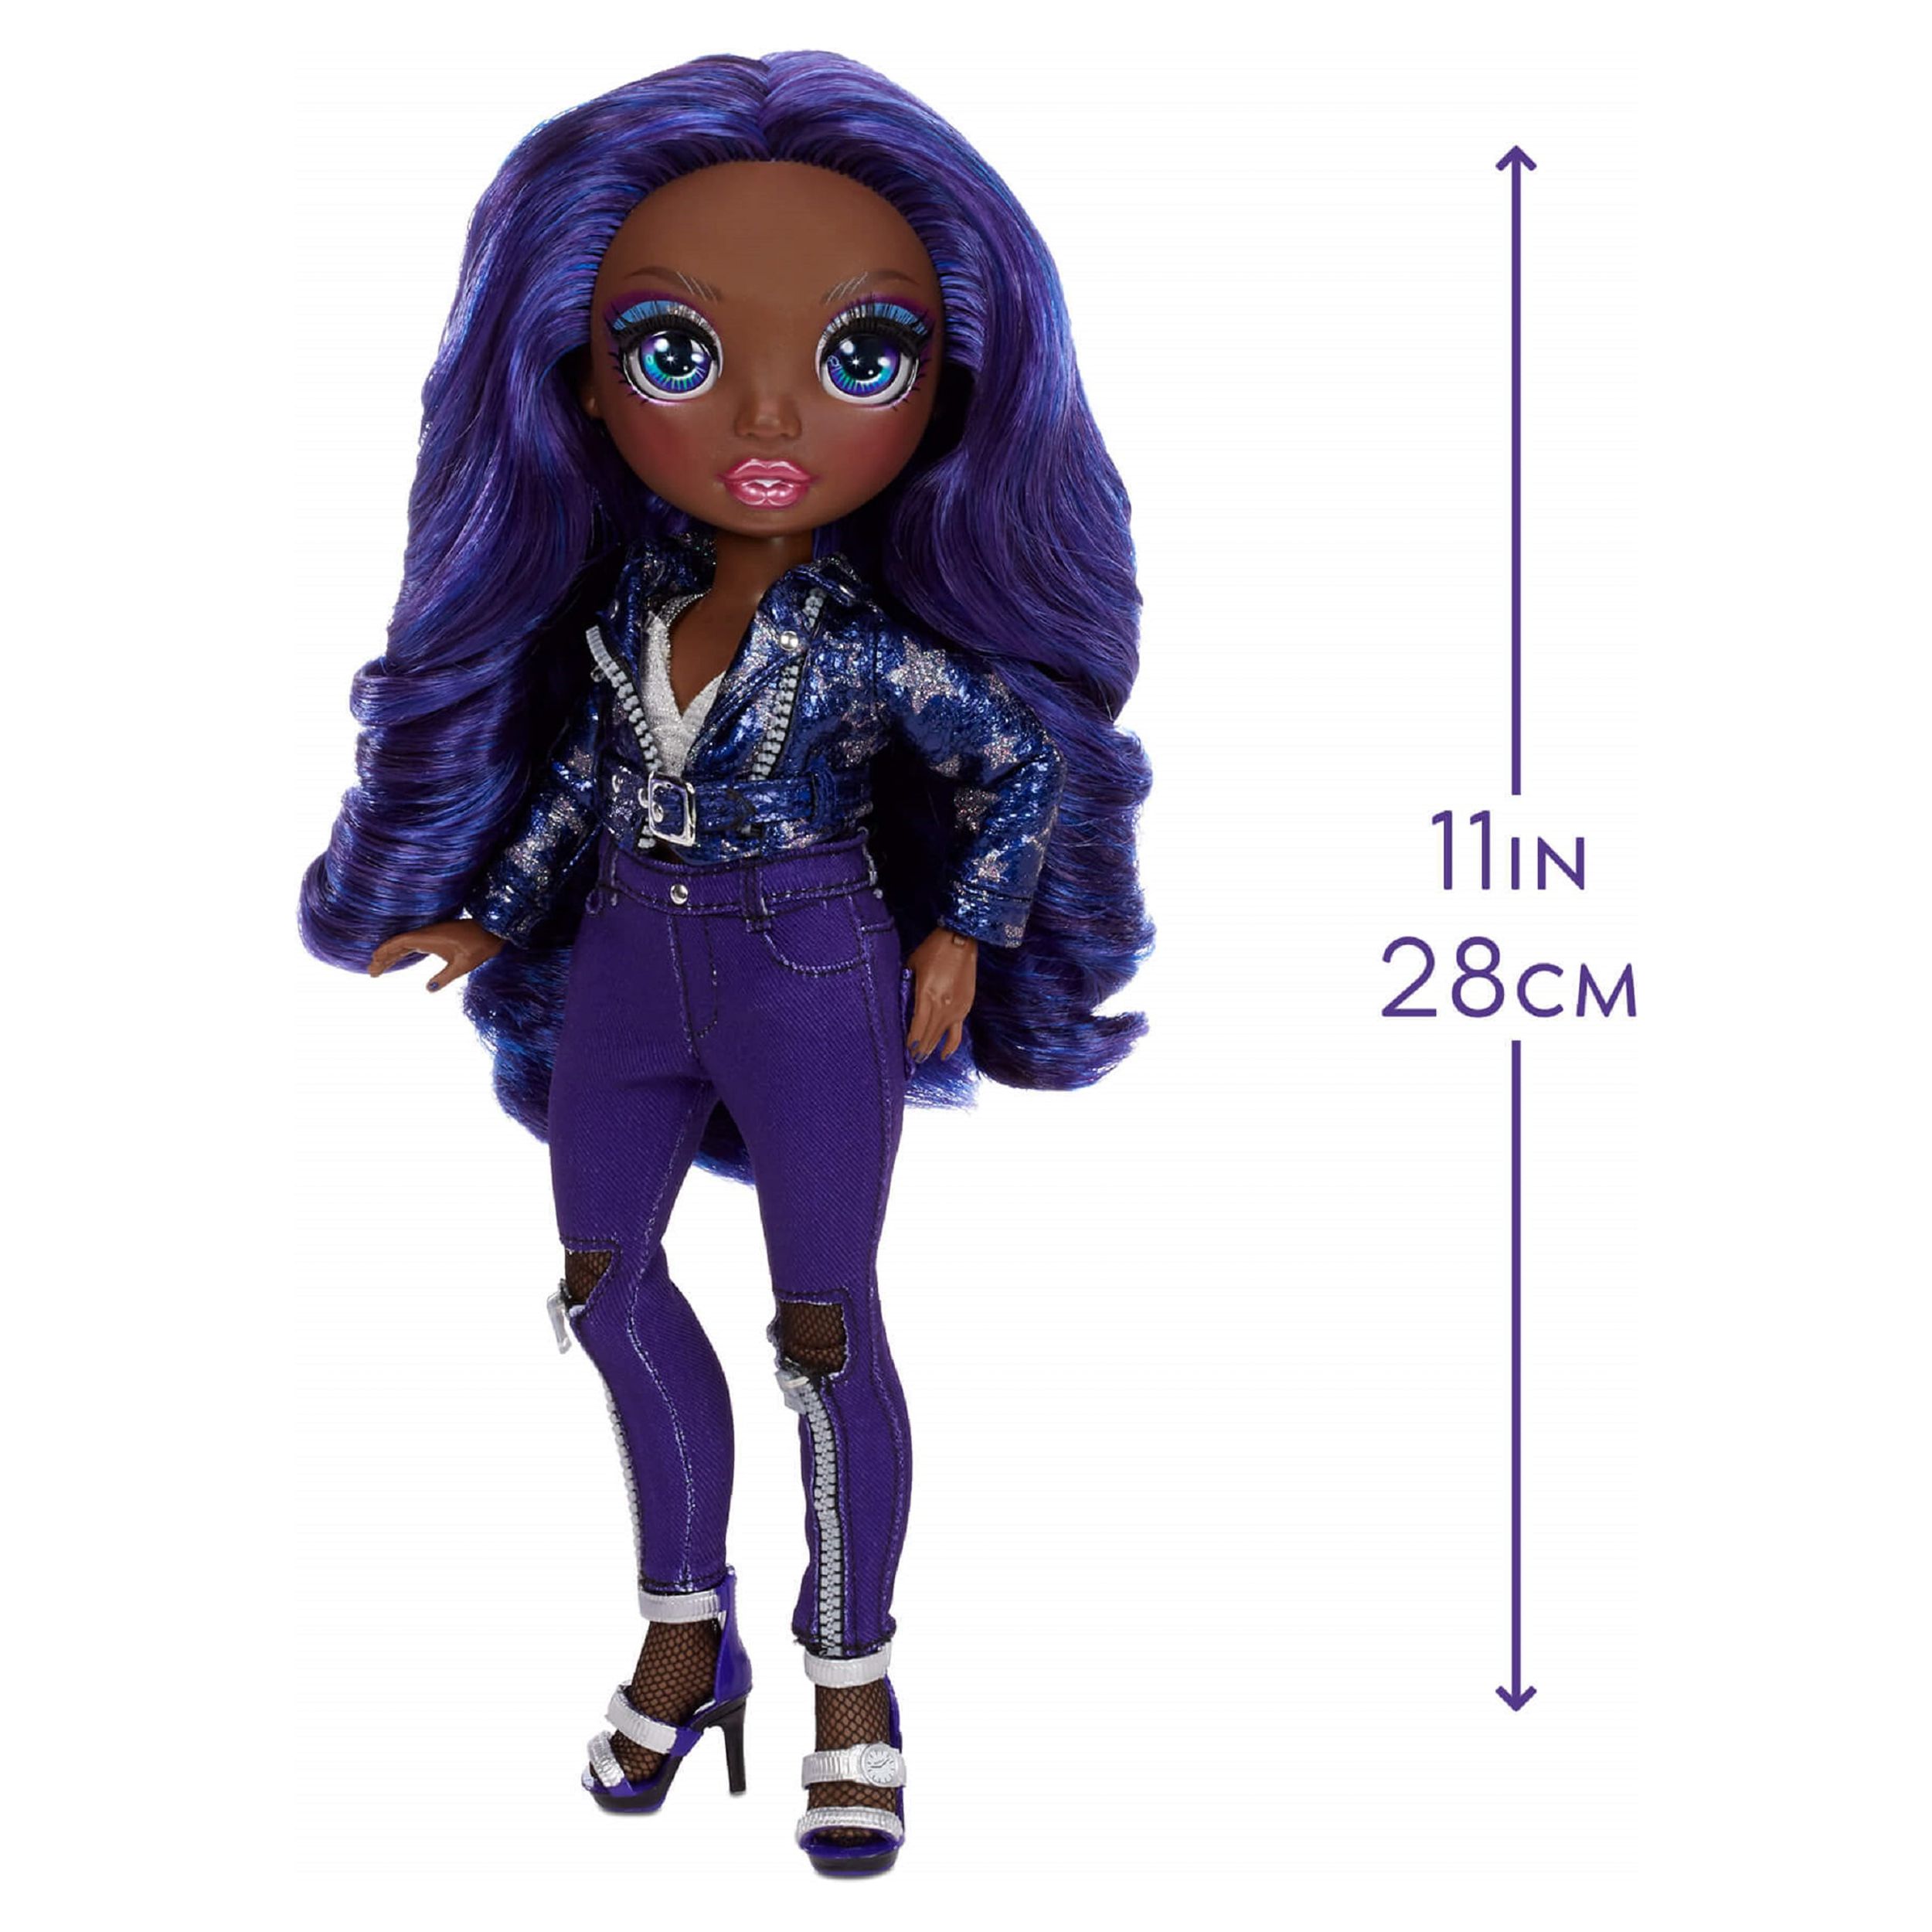 Rainbow High Krystal Bailey – Indigo (Dark Blue Purple) Fashion Doll With 2 Complete Mix & Match Outfits And Accessories, Toys for Kids 6-12 Years Old - image 6 of 8